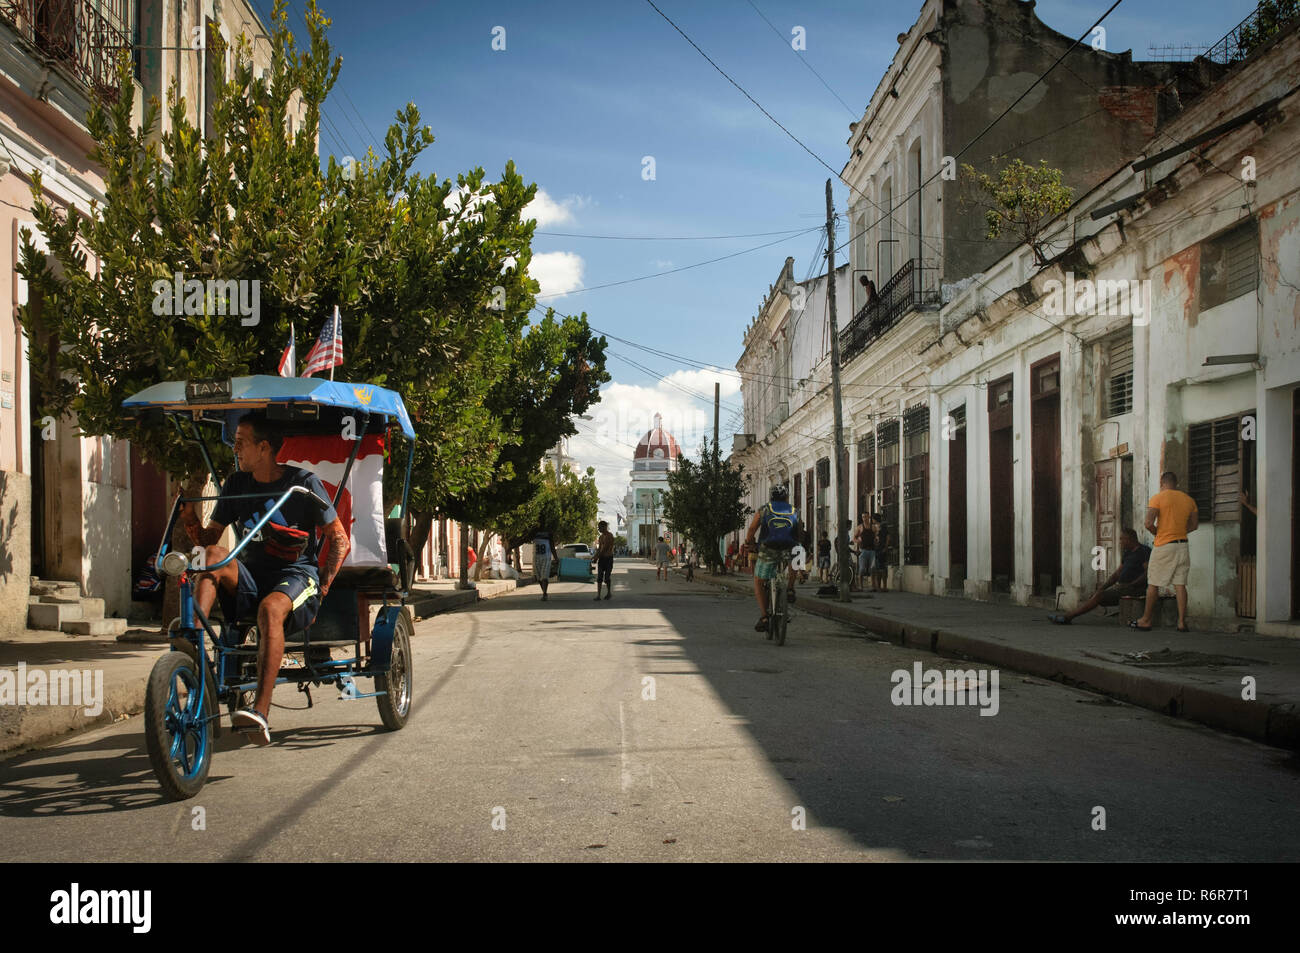 Streetview with a bicycle taxi waiting, and the old townhall in the background. Cienfuegos, Cuba. Stock Photo